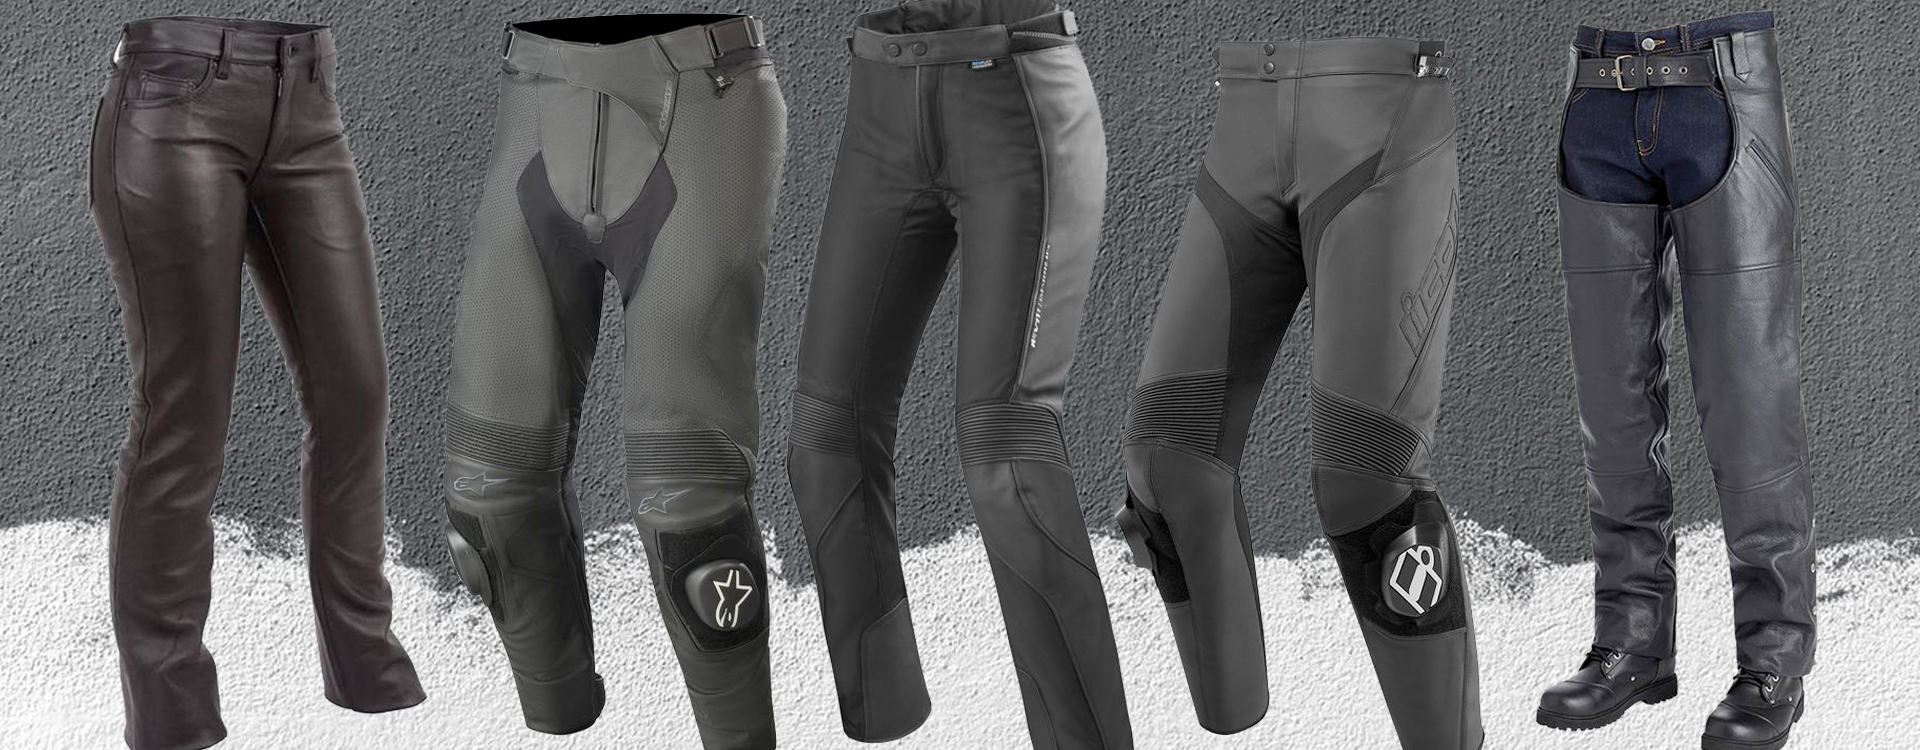 NEW Leather Motorcycle Trouser Black CE Armour Lined Motorcycle Leather Trousers 